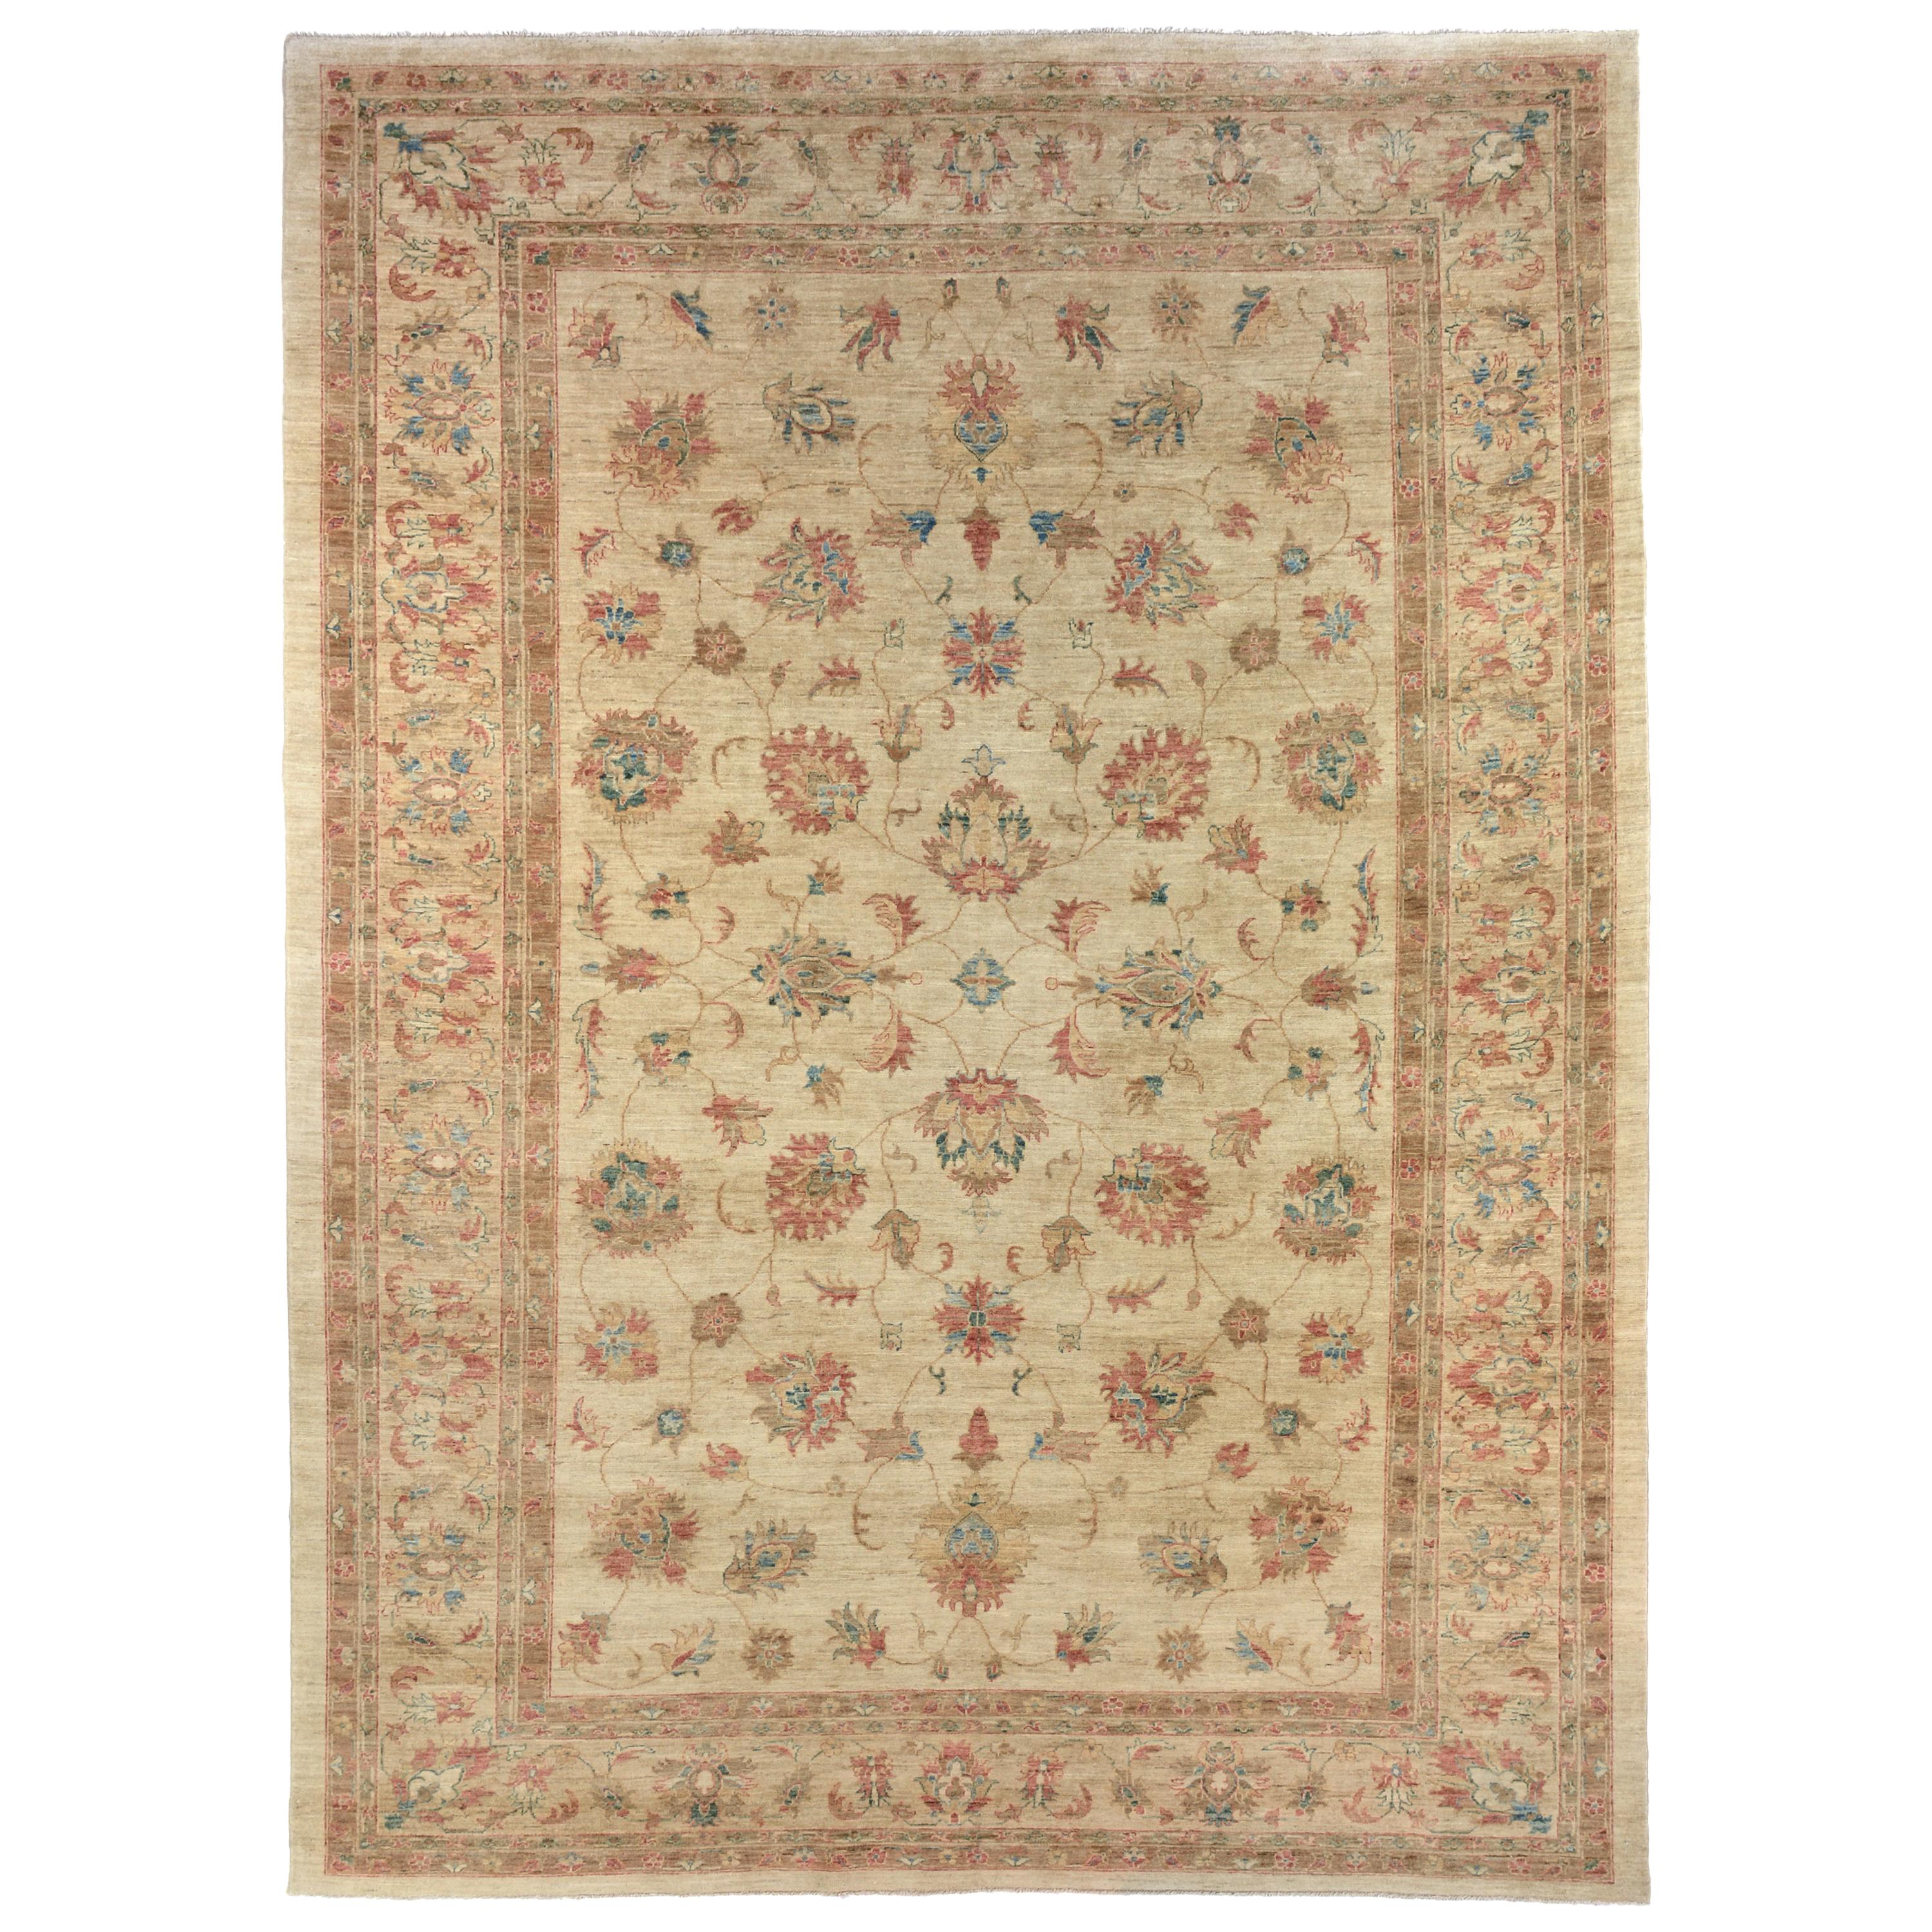 Golden Tan Floral Traditional Area Rug For Sale